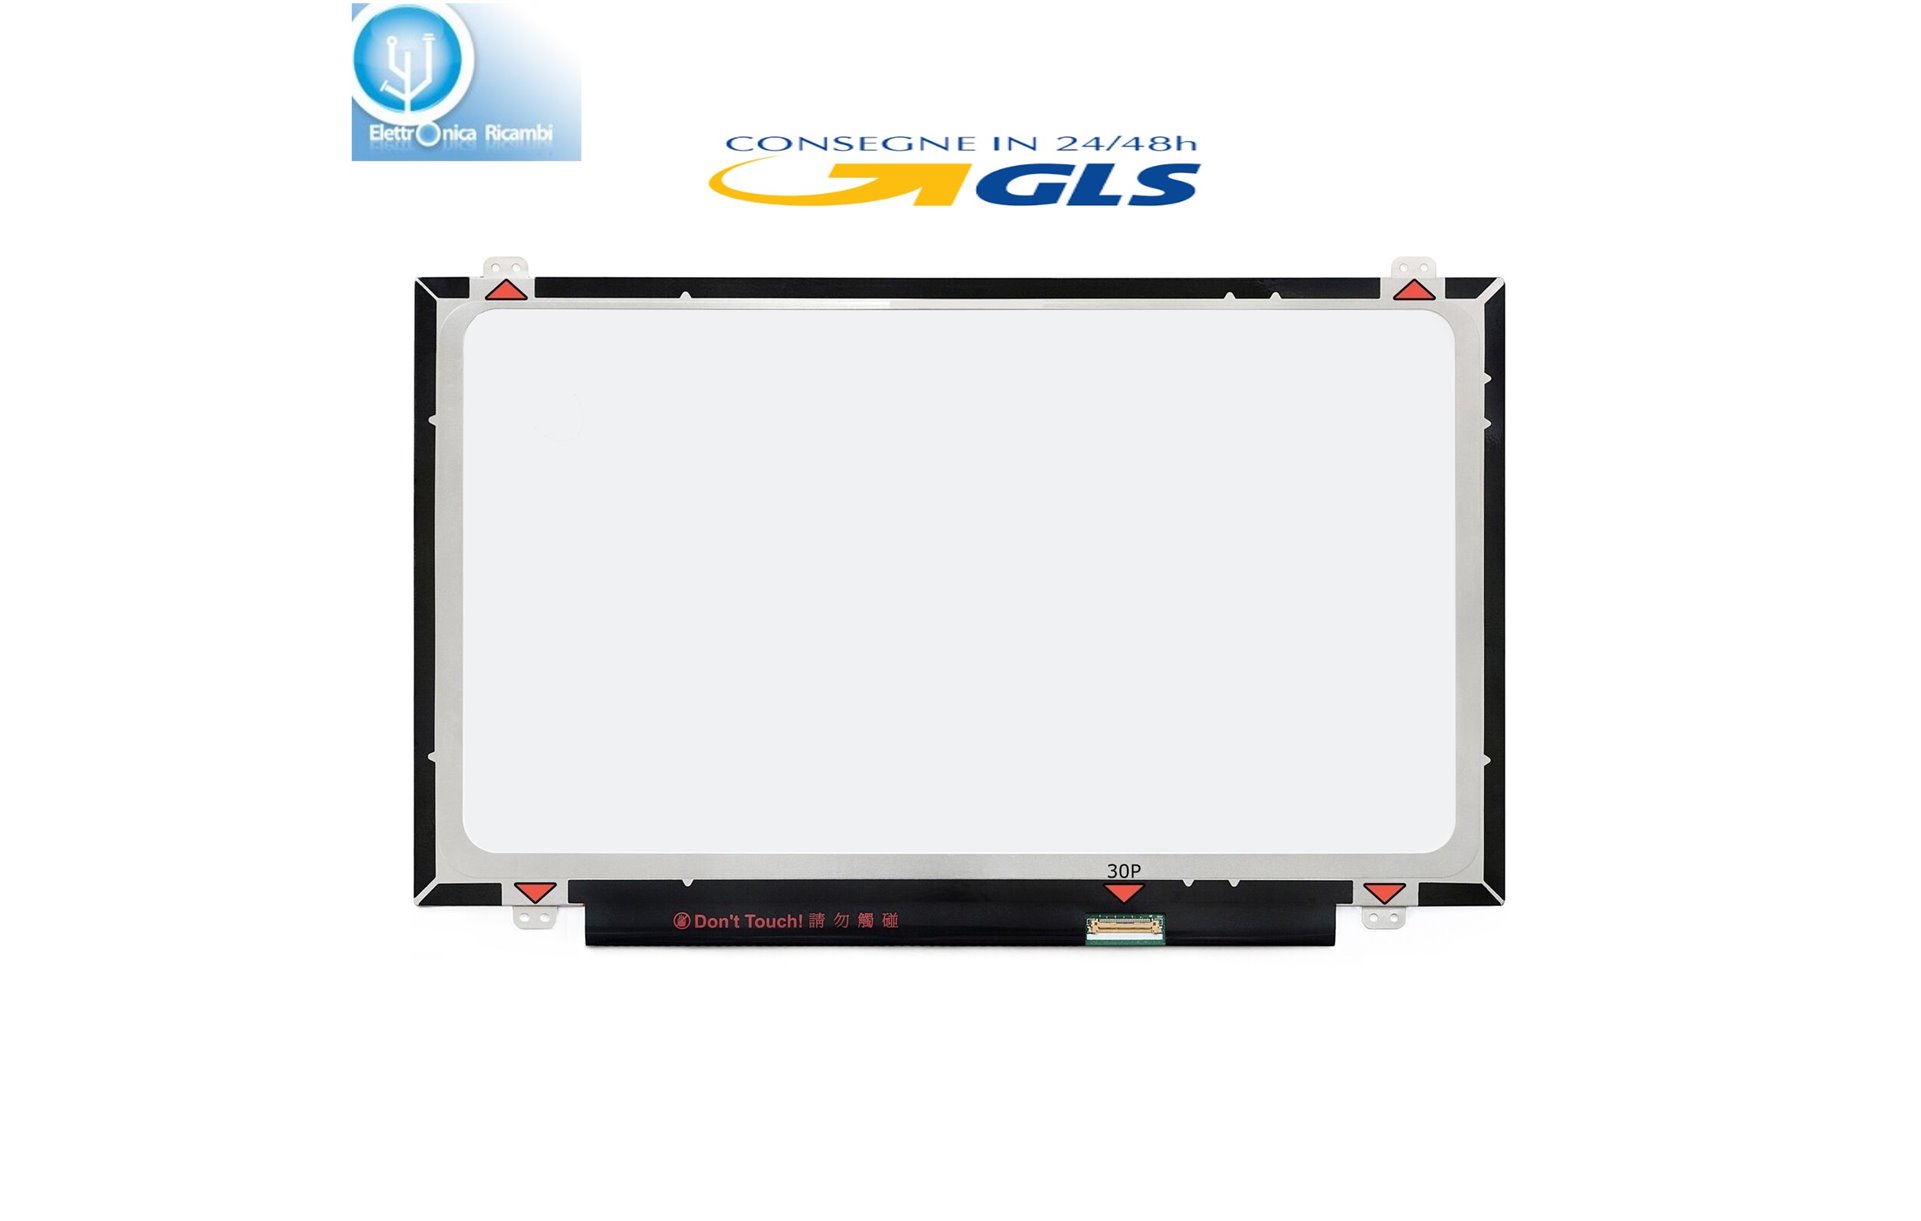 Display LCD Schermo Acer ASPIRE ONE CLOUDBOOK AO1-431M SERIES 14.0 LED 30 pin 1366x768